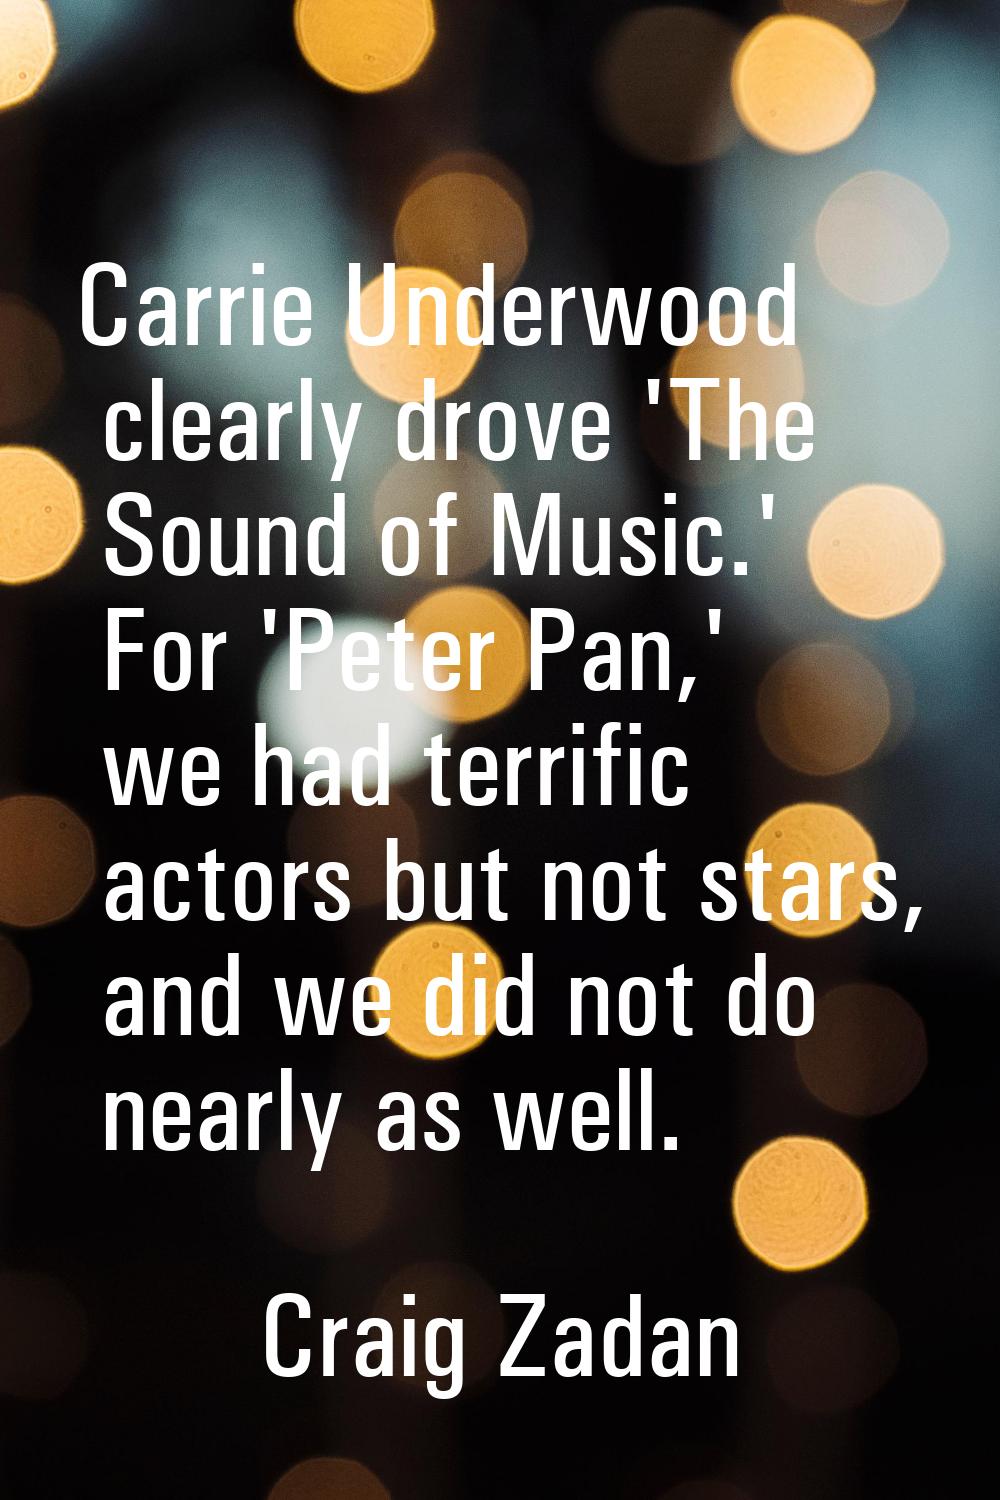 Carrie Underwood clearly drove 'The Sound of Music.' For 'Peter Pan,' we had terrific actors but no